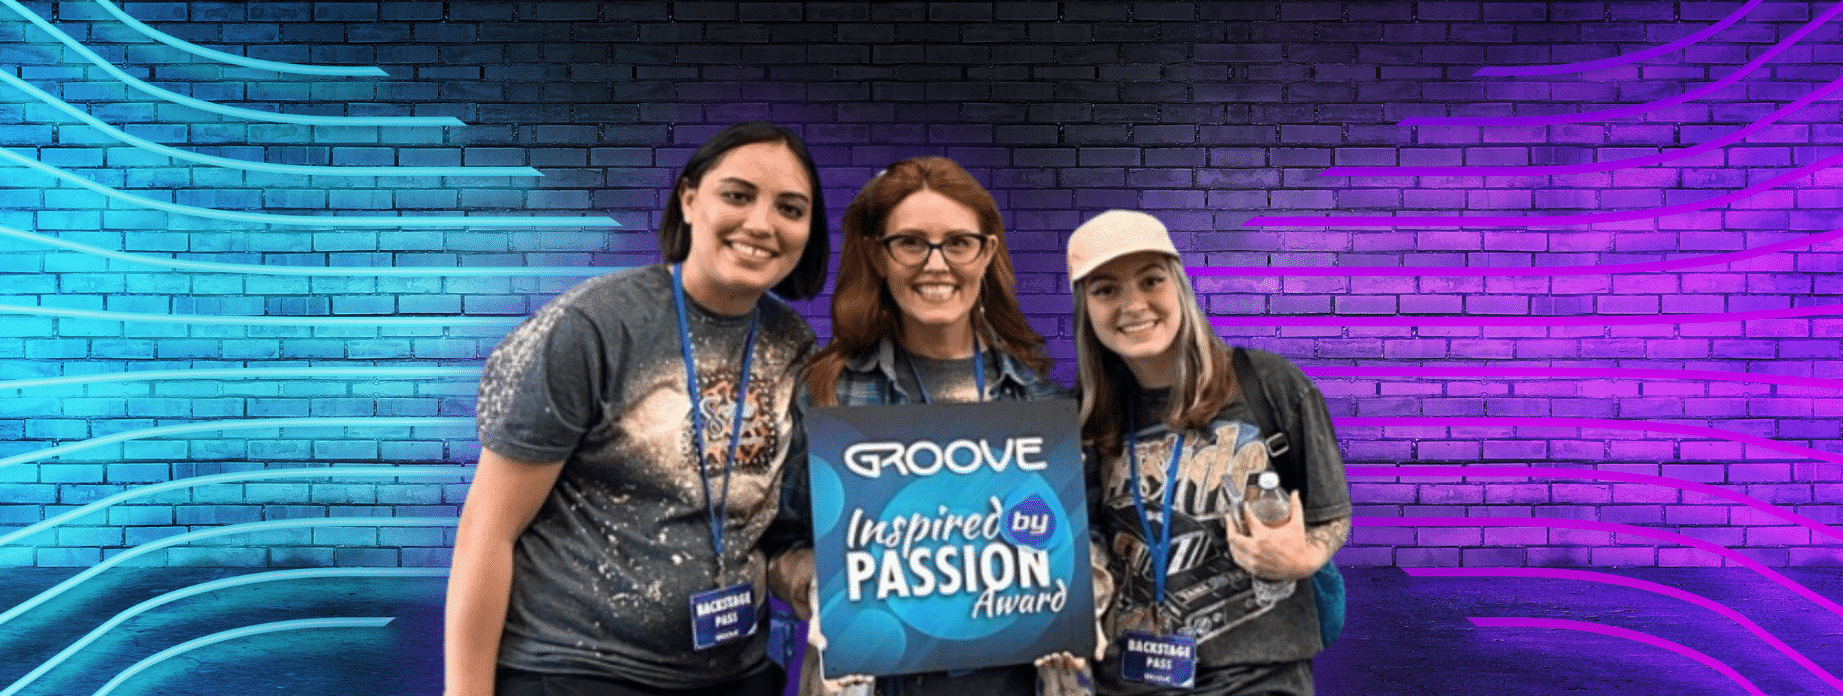 GROOVE COMPETITION!